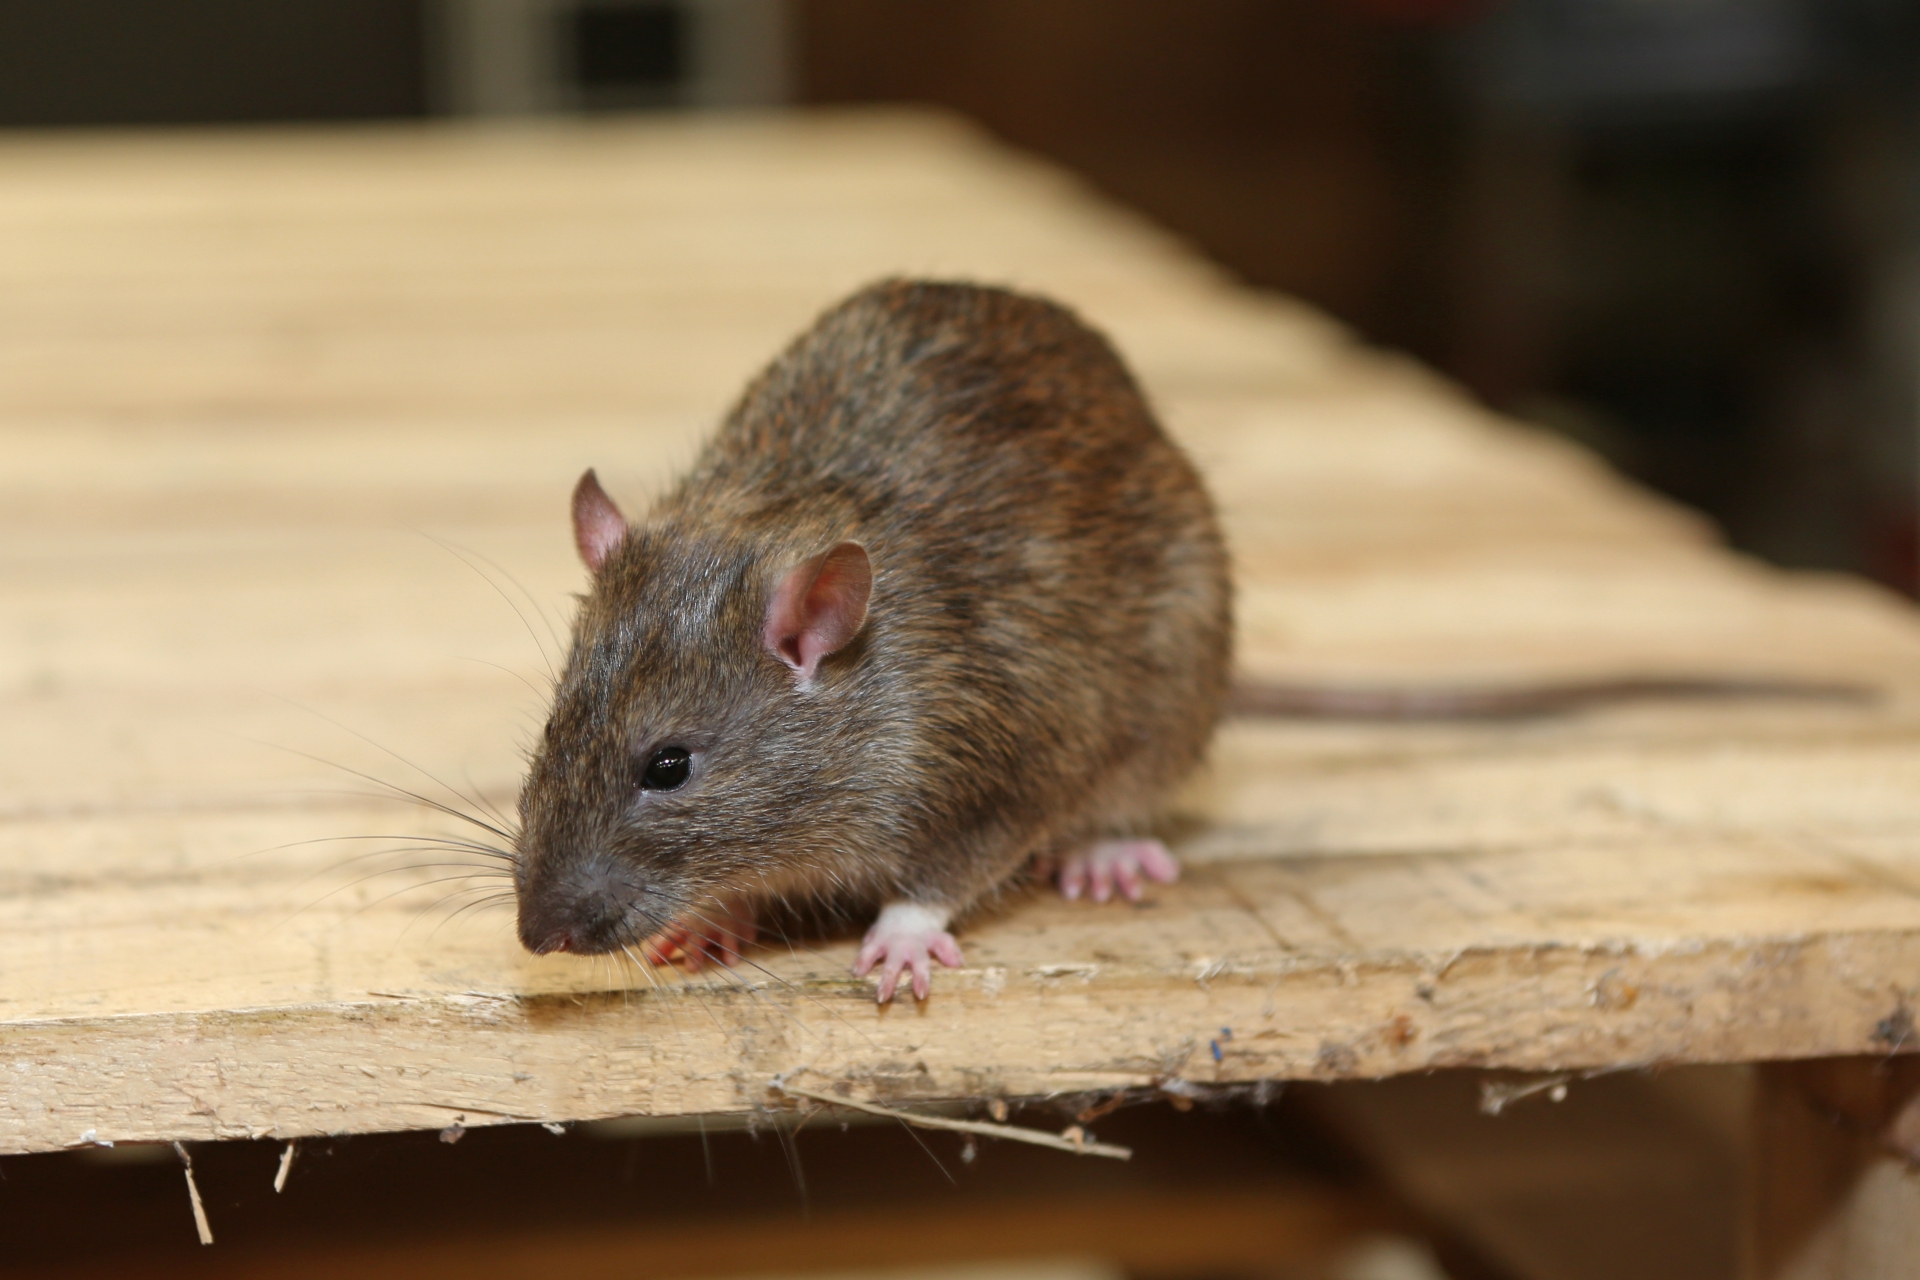 Rat Control, Pest Control in West Brompton, World's End, SW10. Call Now 020 8166 9746